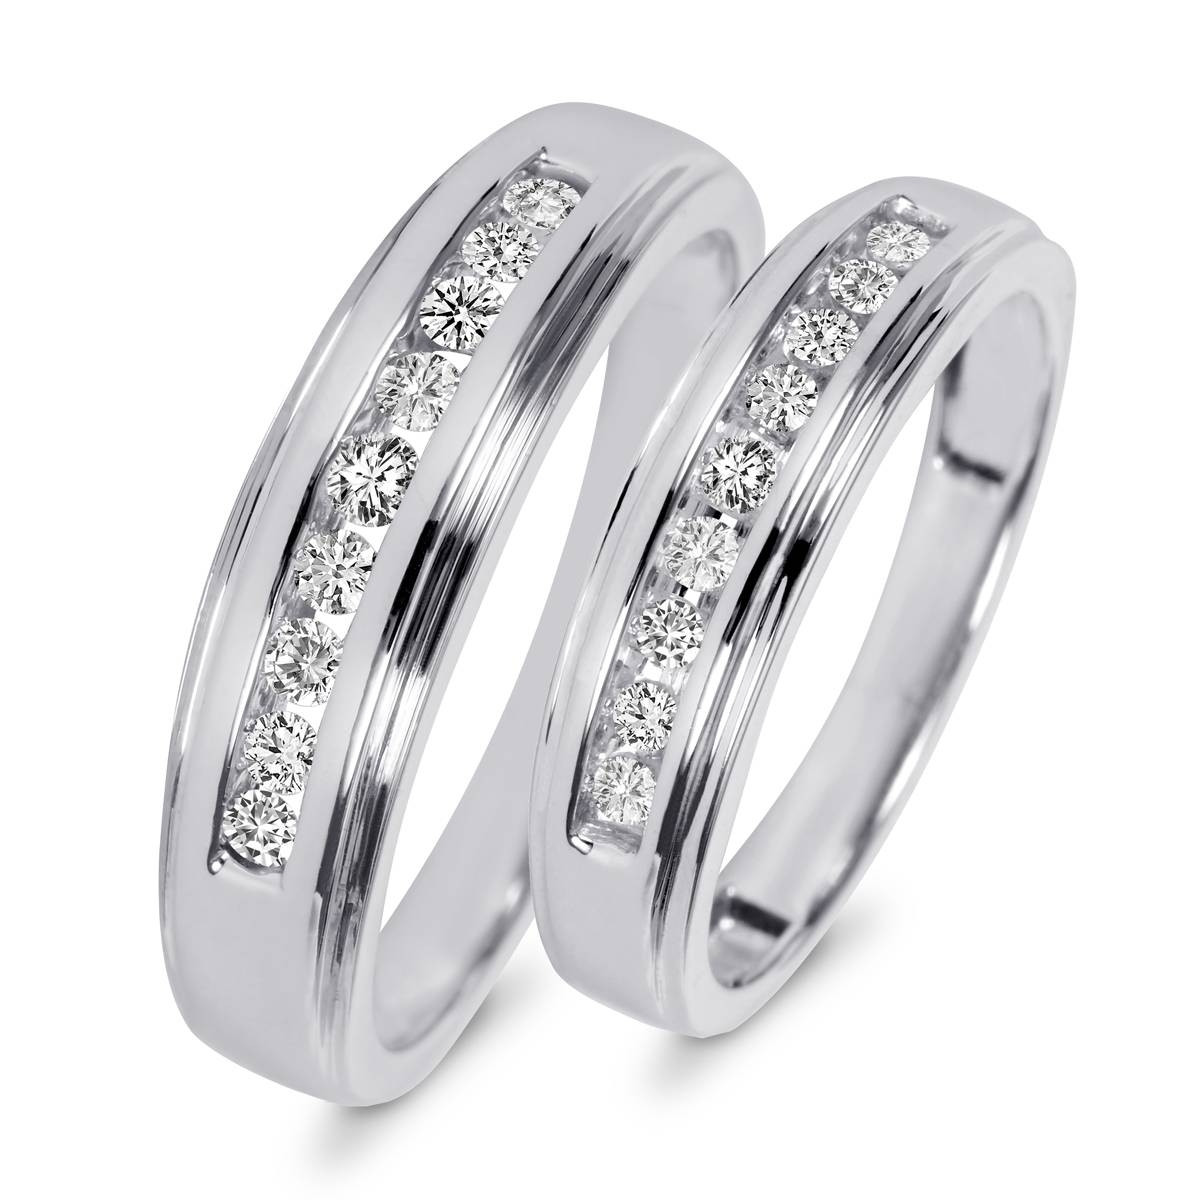 Cheap Wedding Band Sets
 15 Inspirations of Cheap Wedding Bands Sets His And Hers